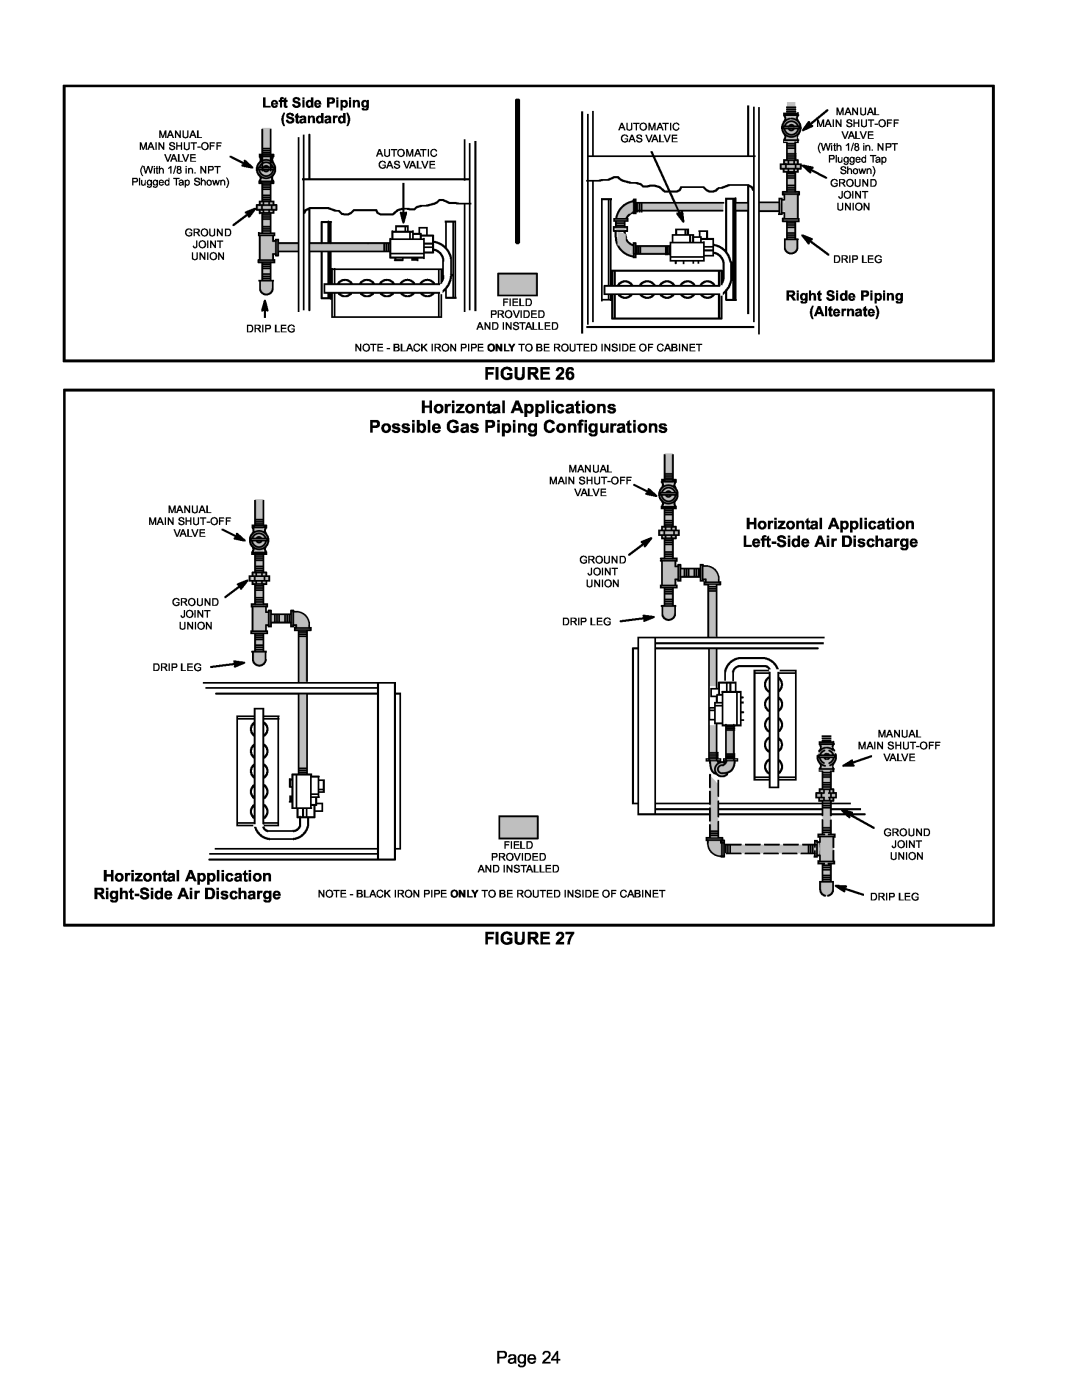 Lennox International Inc Merit Series Gas Furnace FIGURE Horizontal Applications, Possible Gas Piping Configurations, Page 